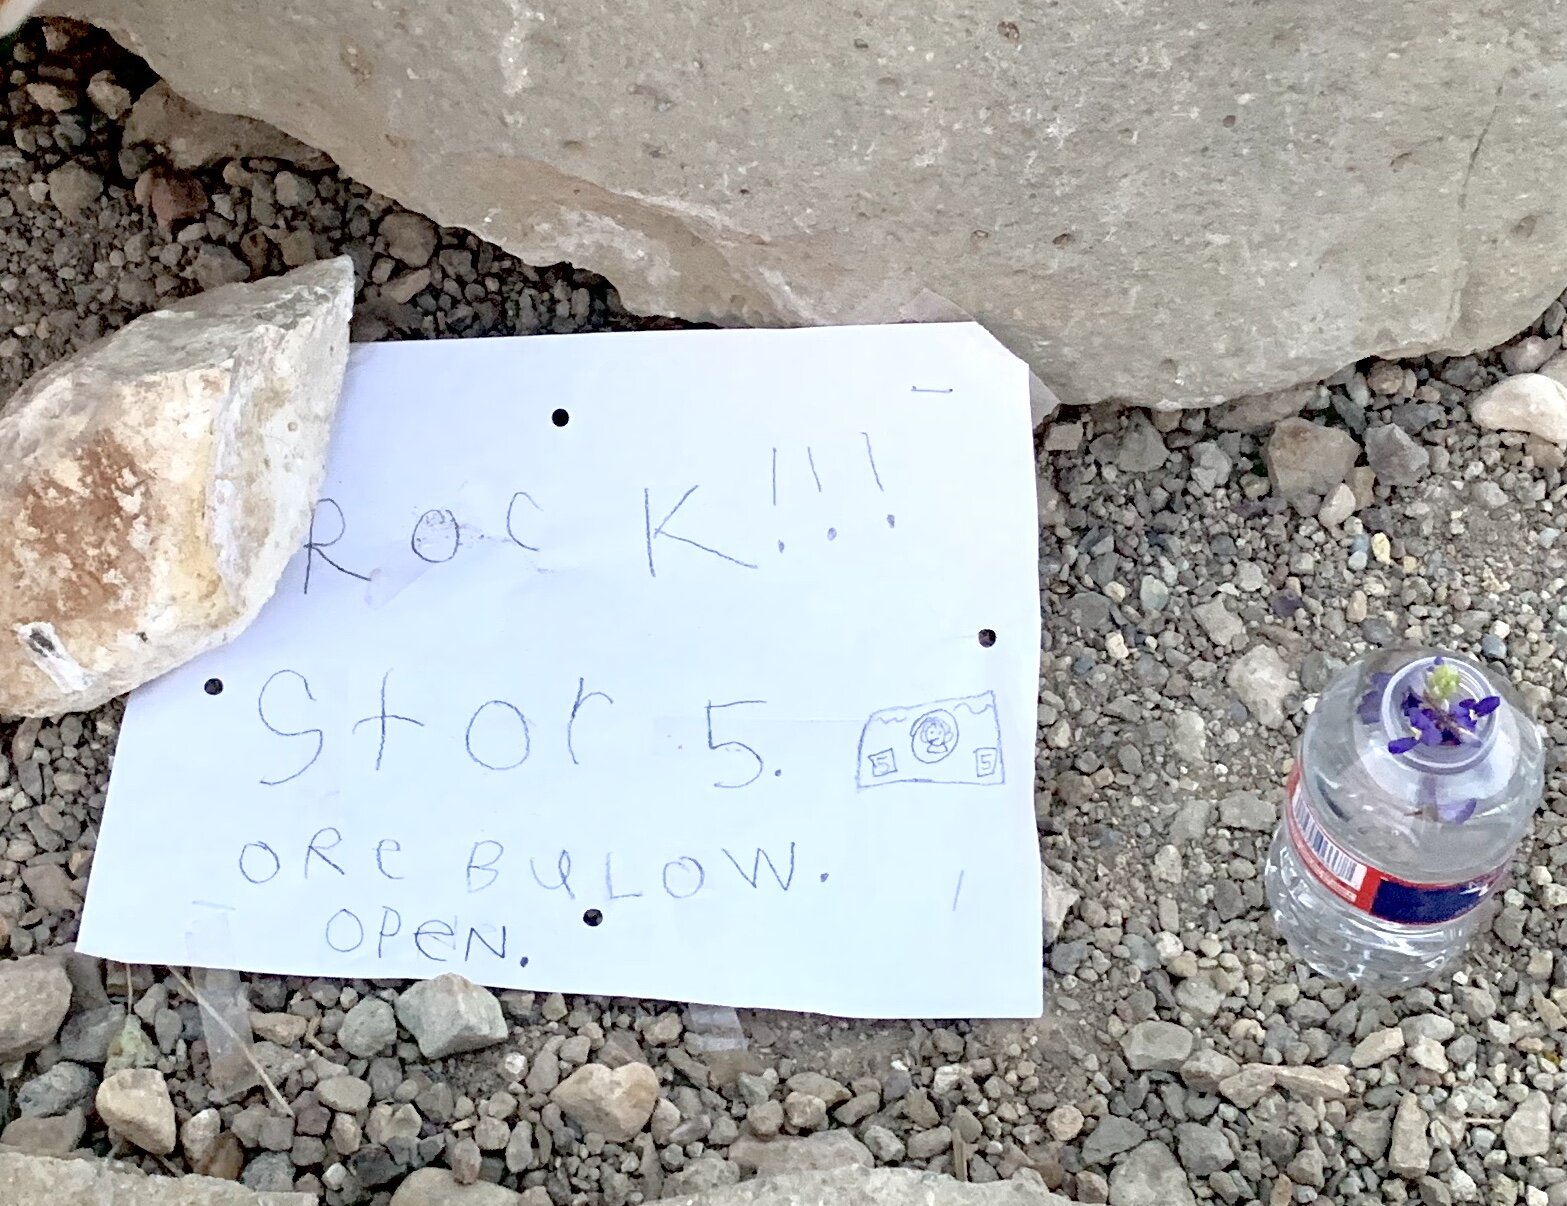  I had to chuckle at a kid in the RV park trying to make some money running a “Rock Stor”. “5 [dollars] ore below. OPeN”… 🌺 I didn’t see anyone around; I think it was a self-service stor. 